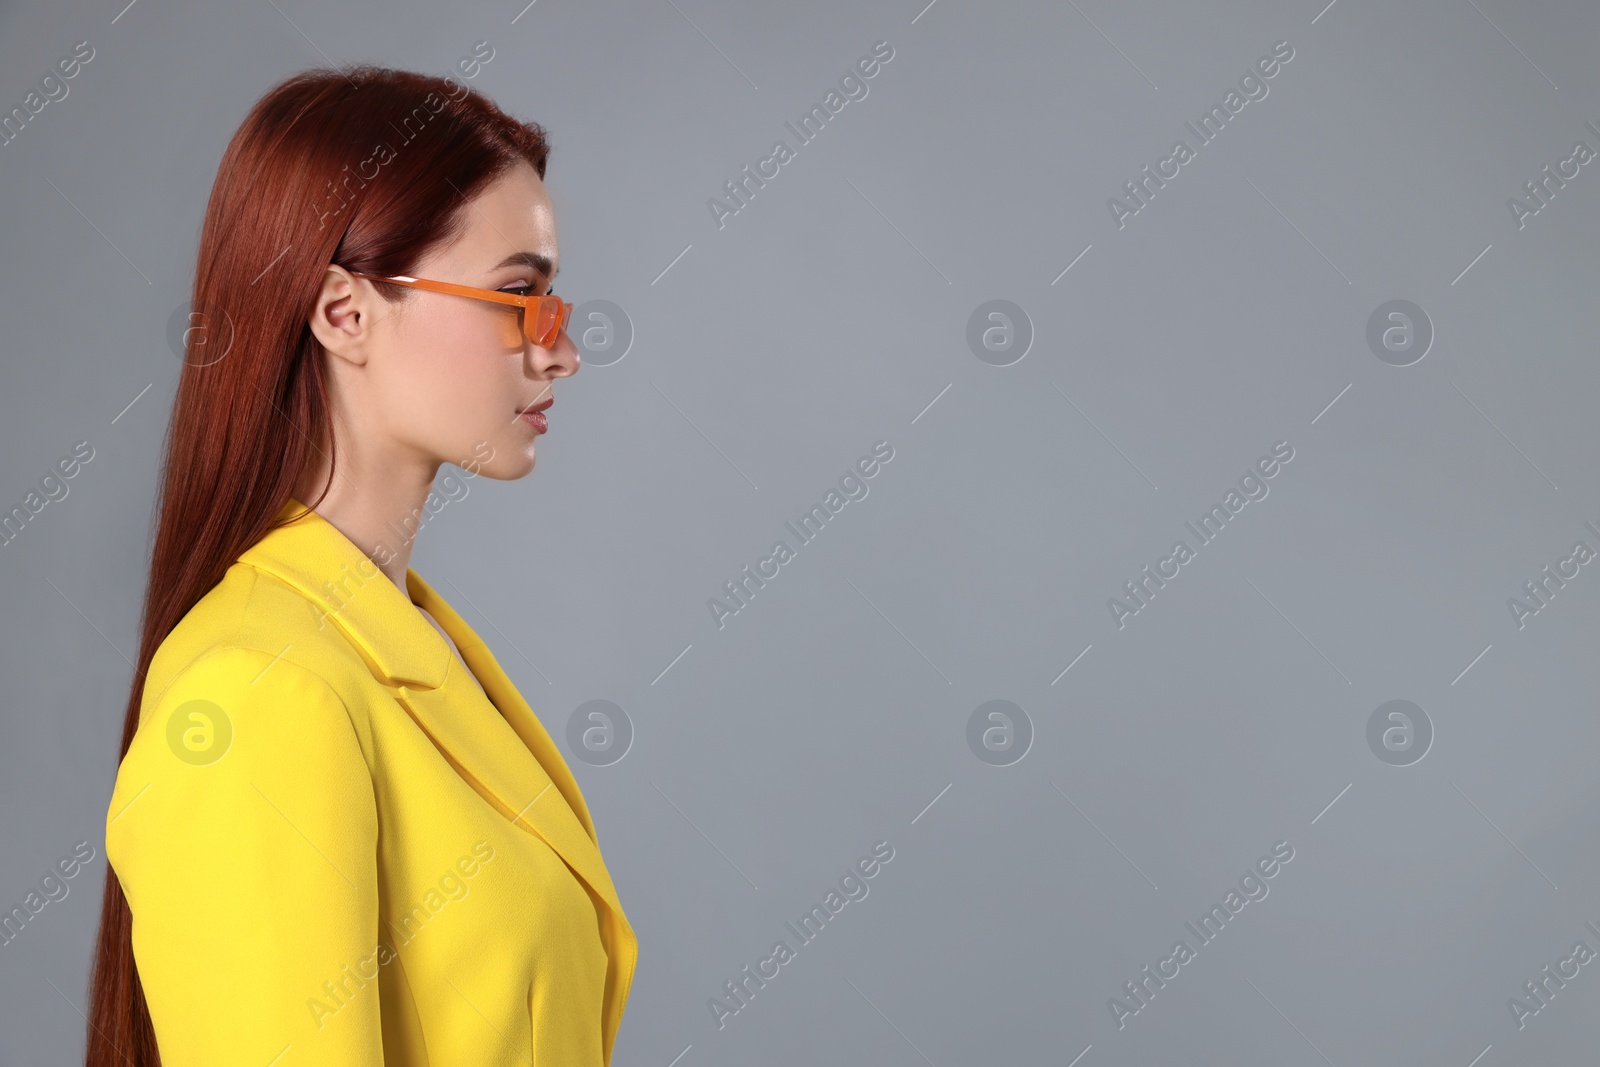 Photo of Stylish woman with red dyed hair and orange sunglasses on light gray background, space for text